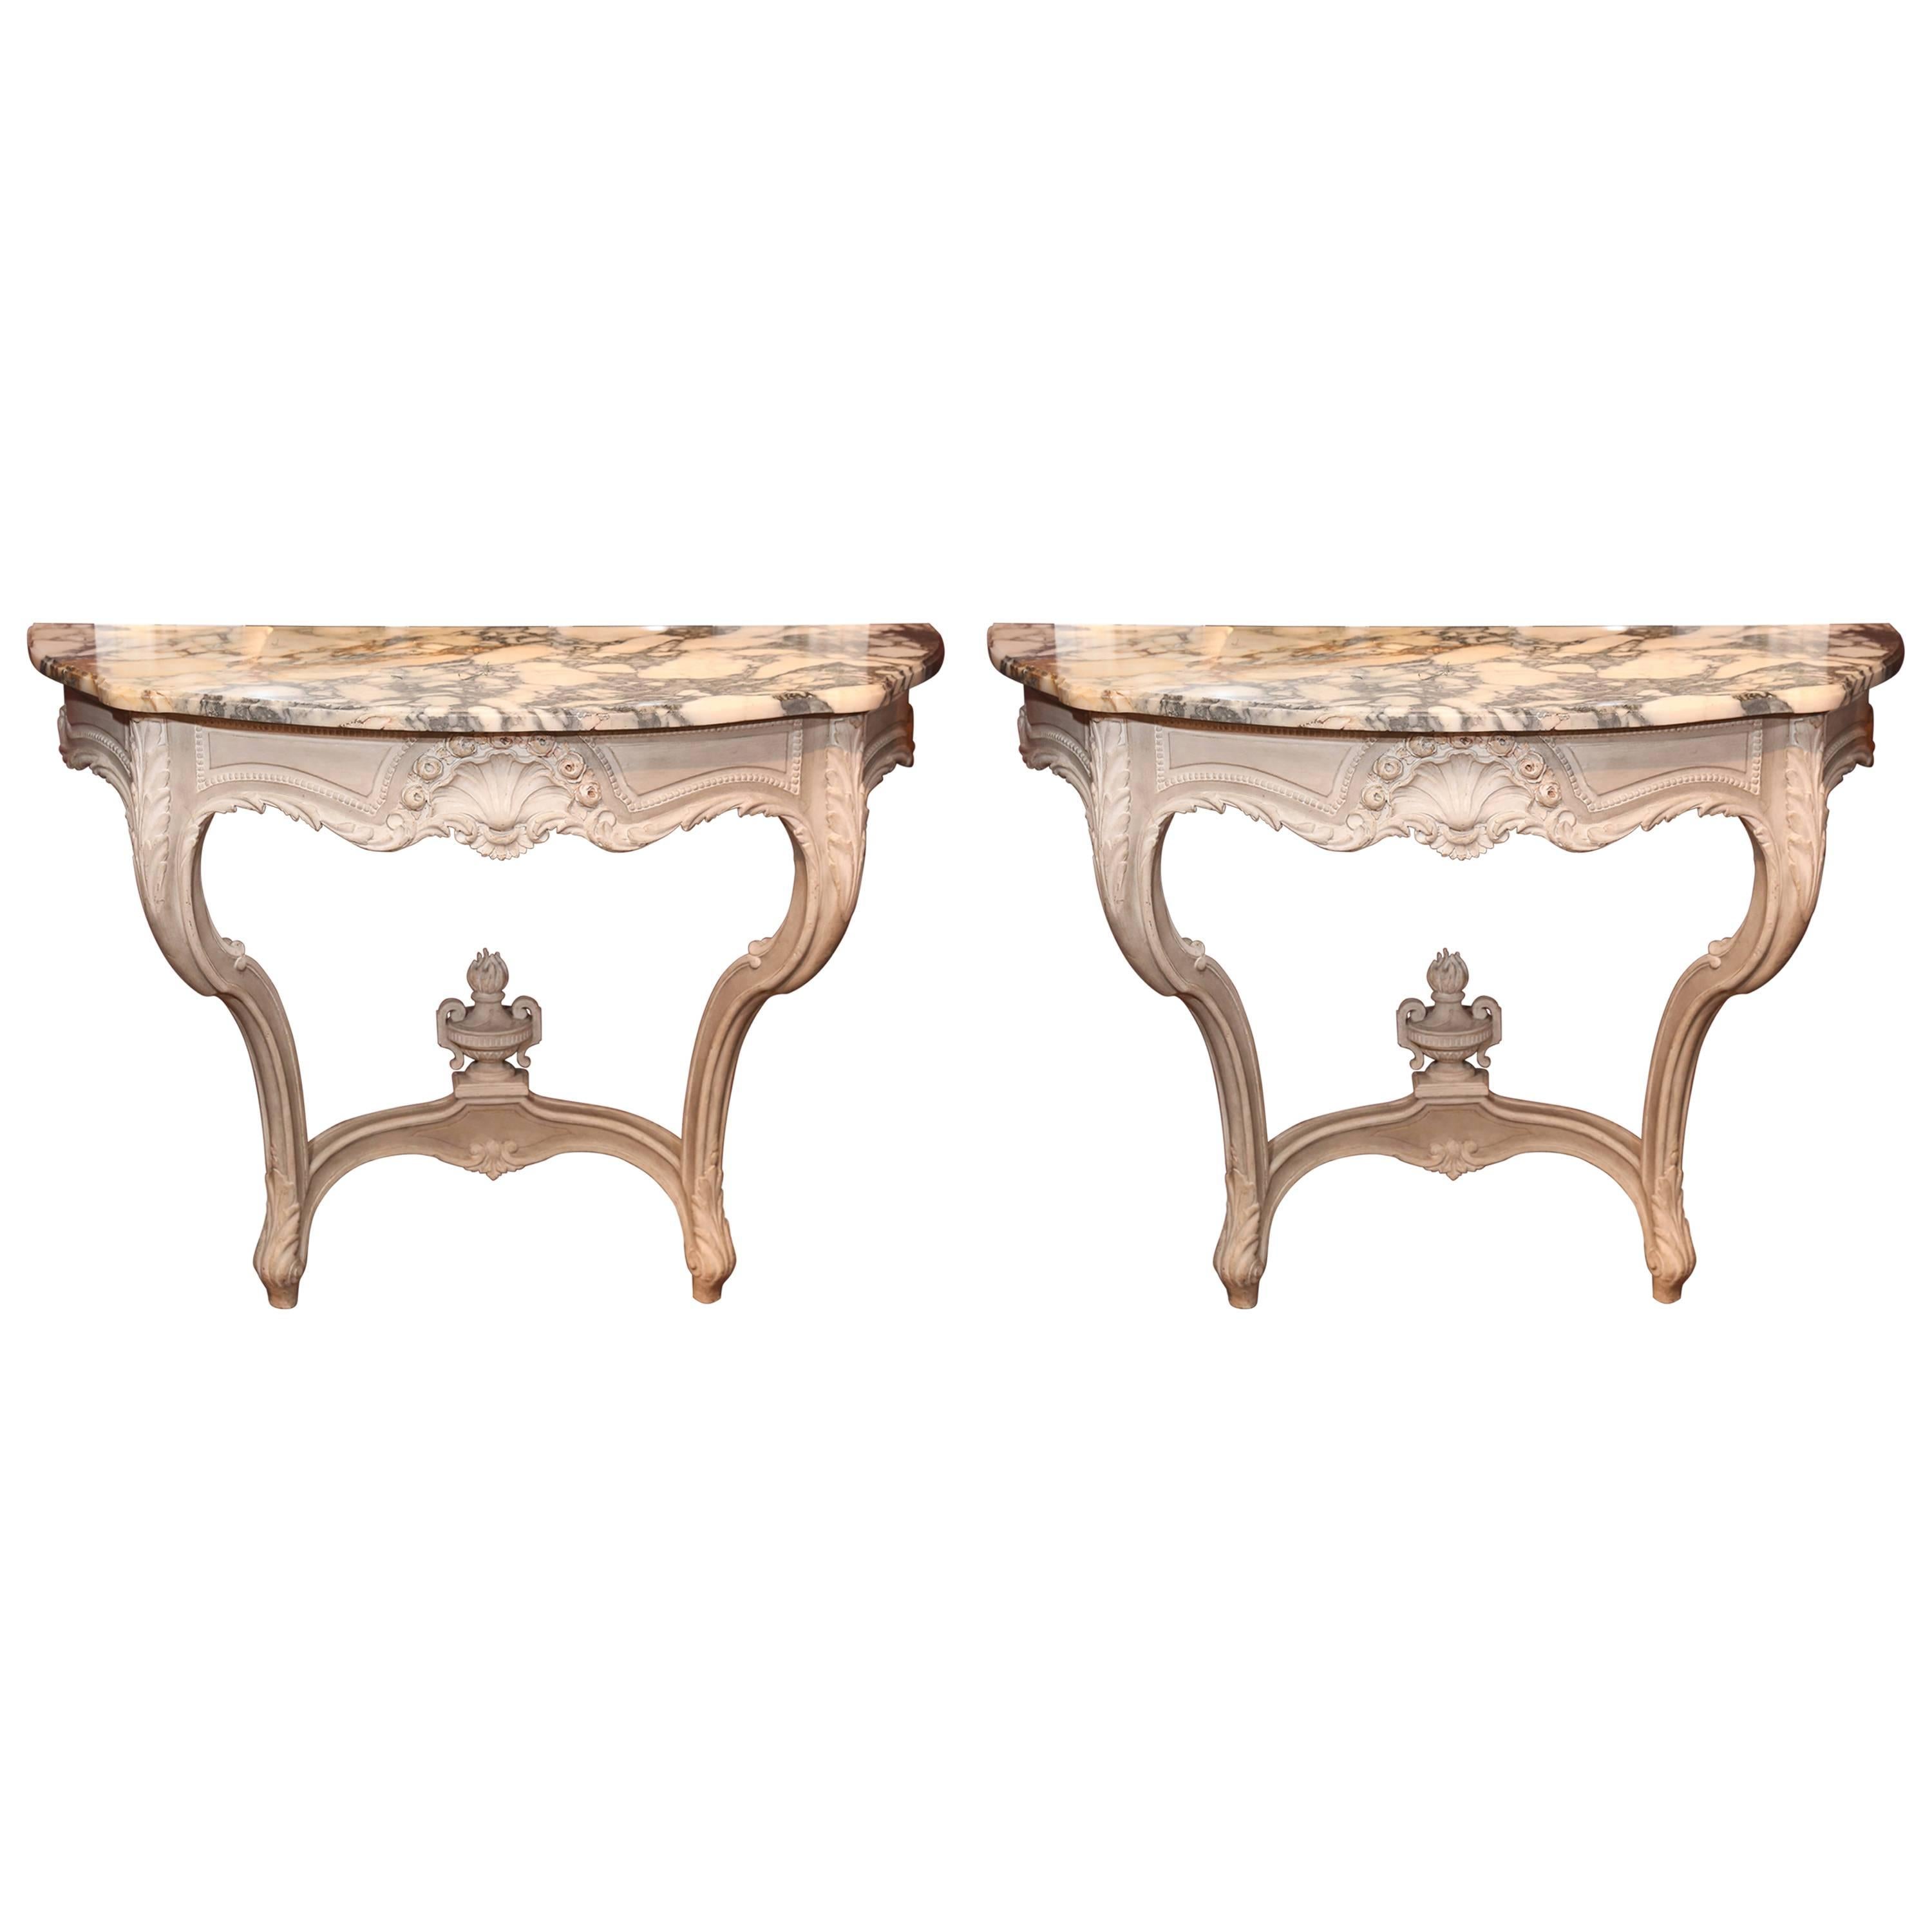 Pair of French Louis XV Painted Console Tables with White and Gray Marble Tops